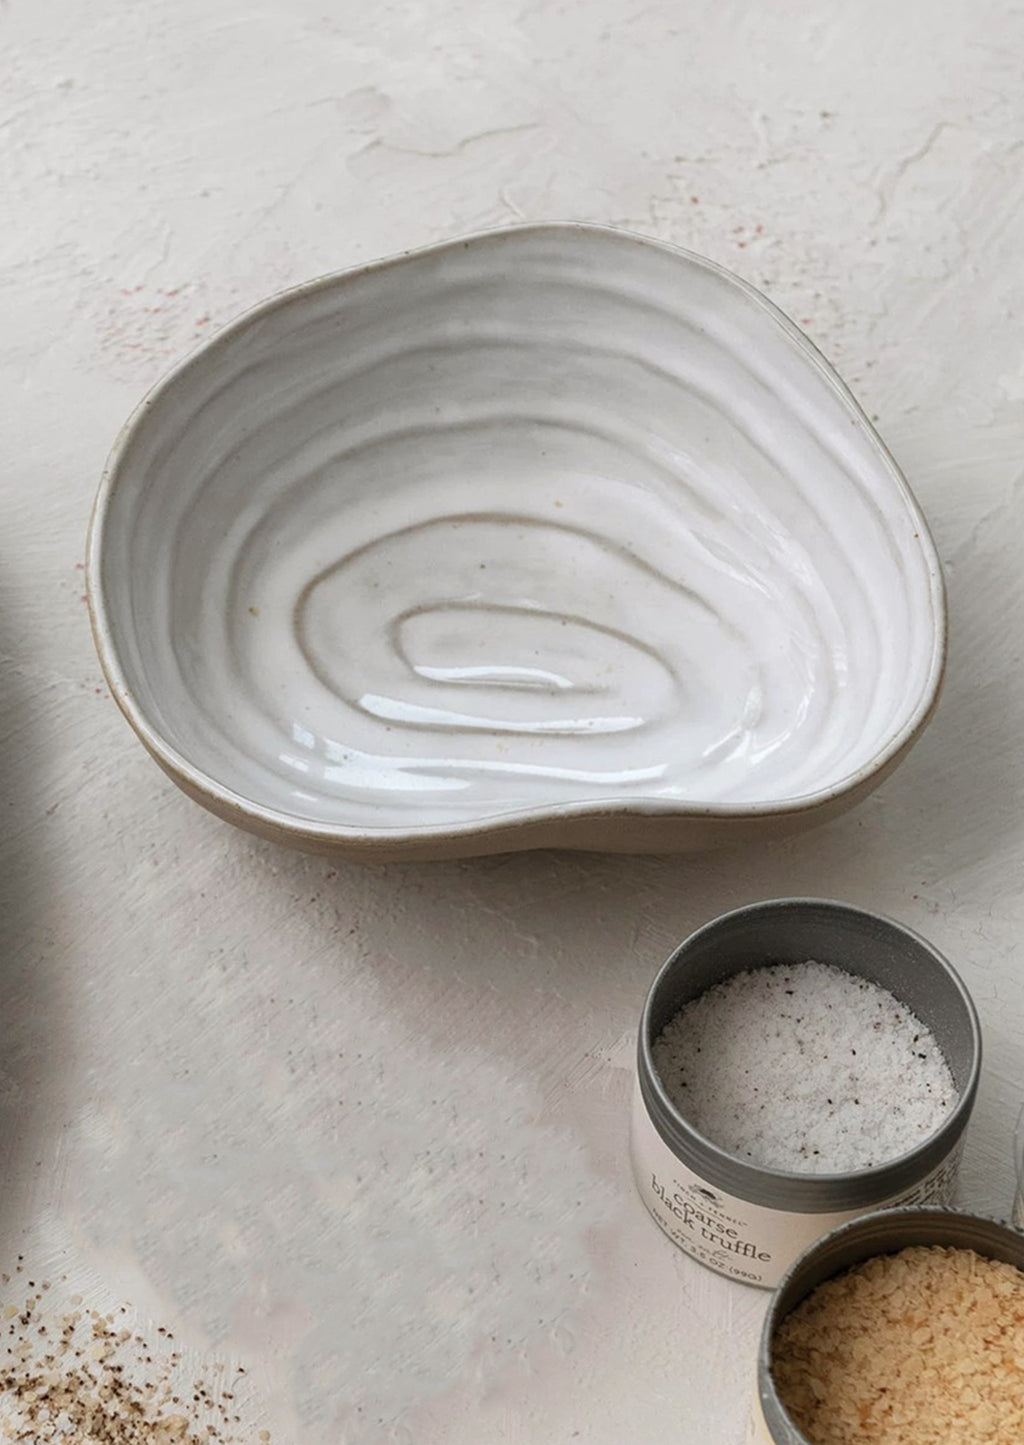 Serving Bowl: A serving bowl in the shape of a shell.